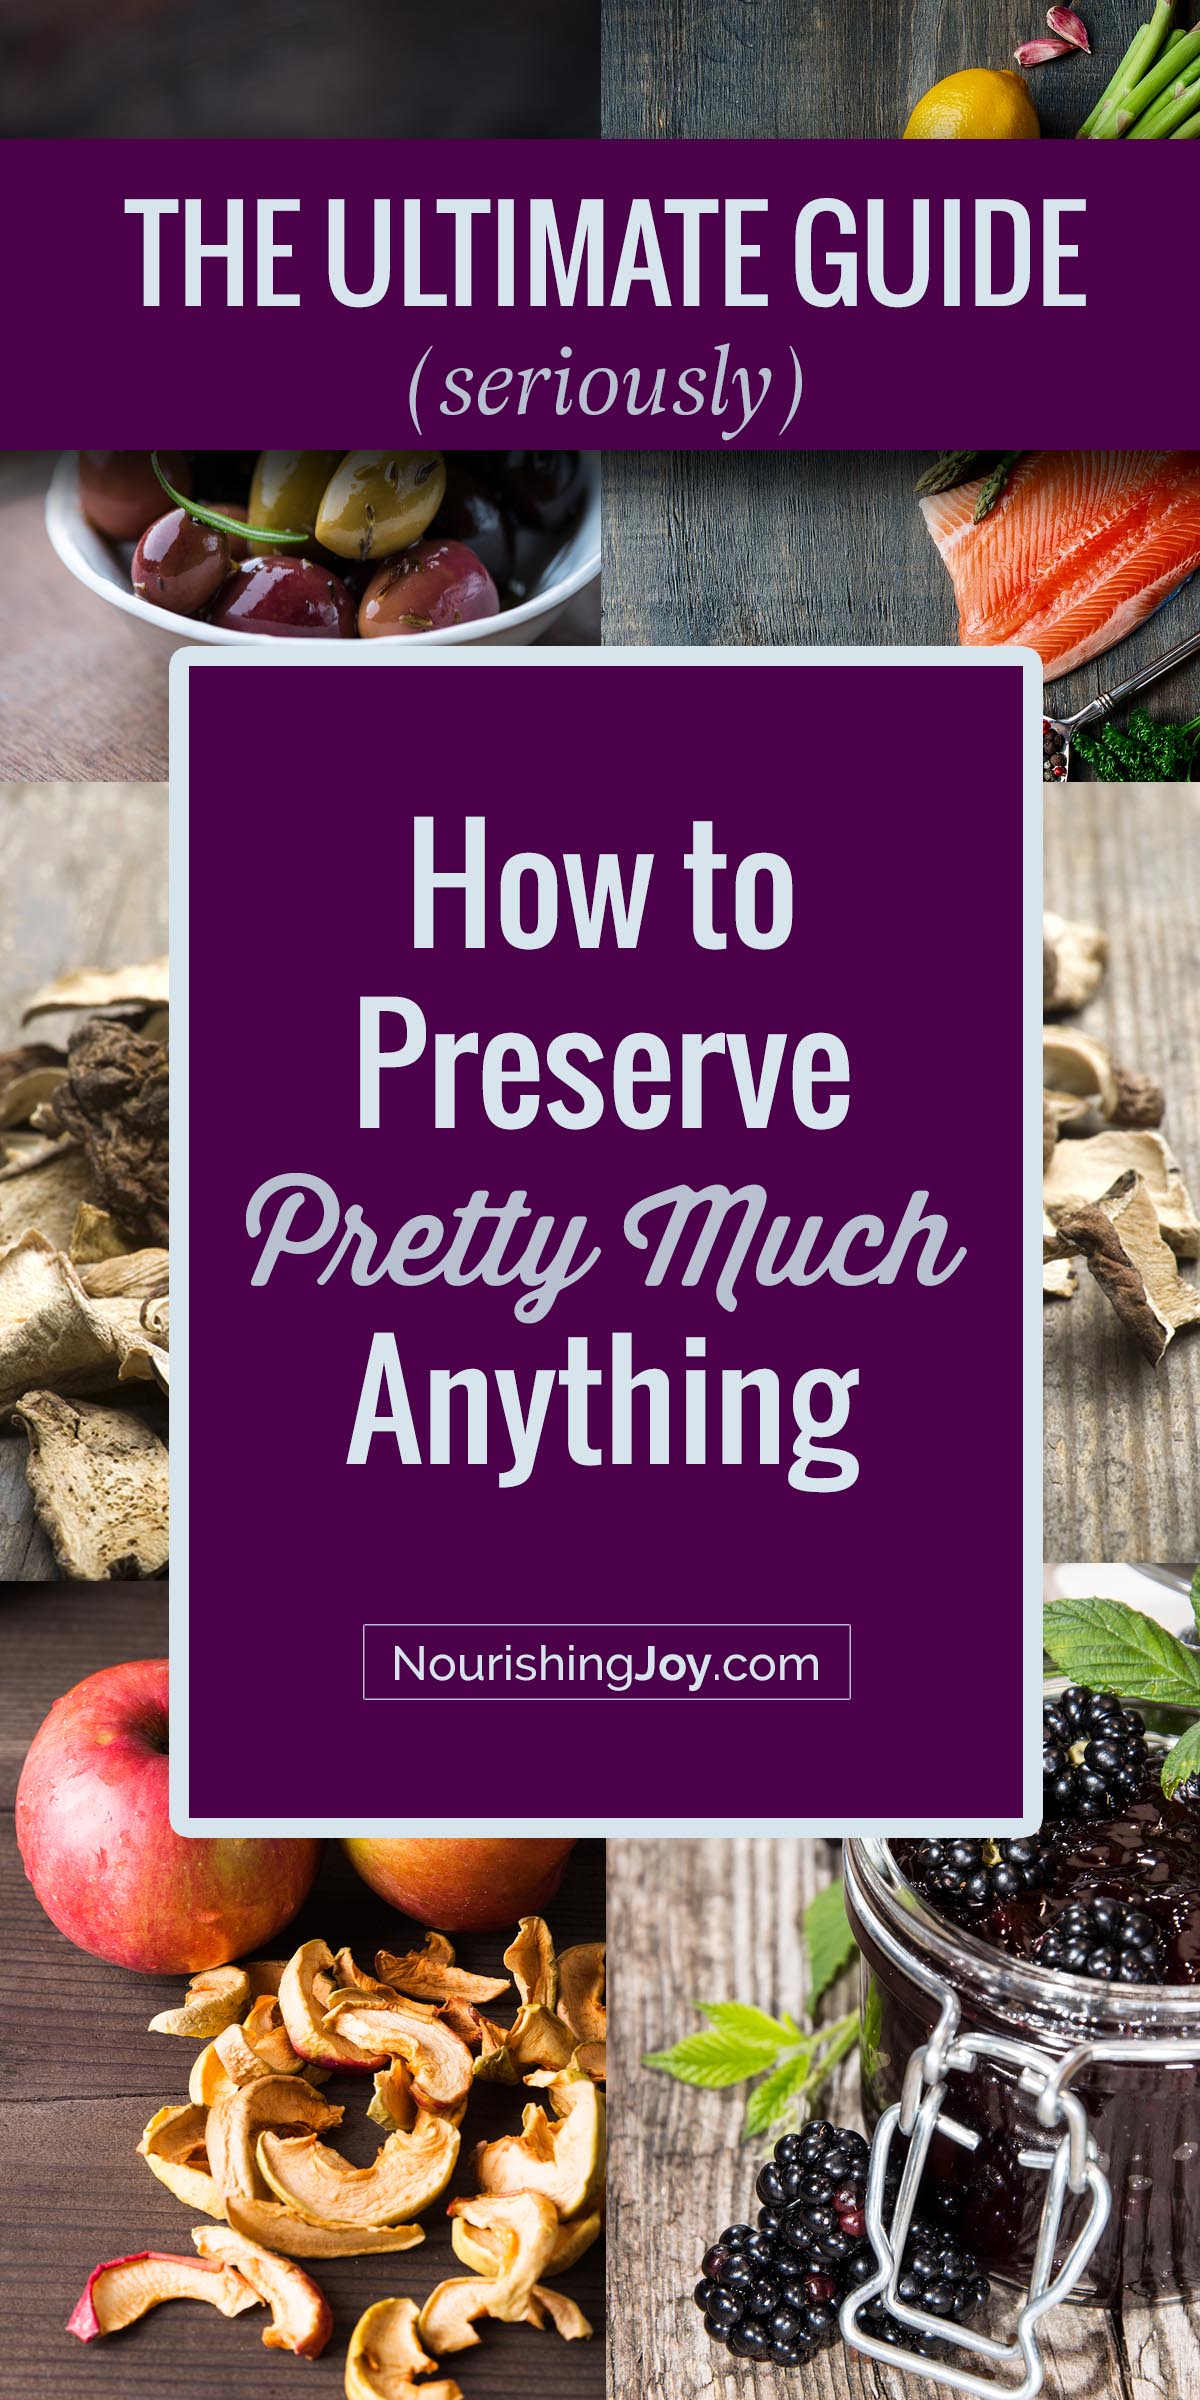 How to preserve food: Summertime is a time of bounty - so here's a thoroughly packed guide to how to preserve pretty much ANYTHING - from apples, bamboo shoots, and cherry blossoms to salmon, yams, and zucchini!